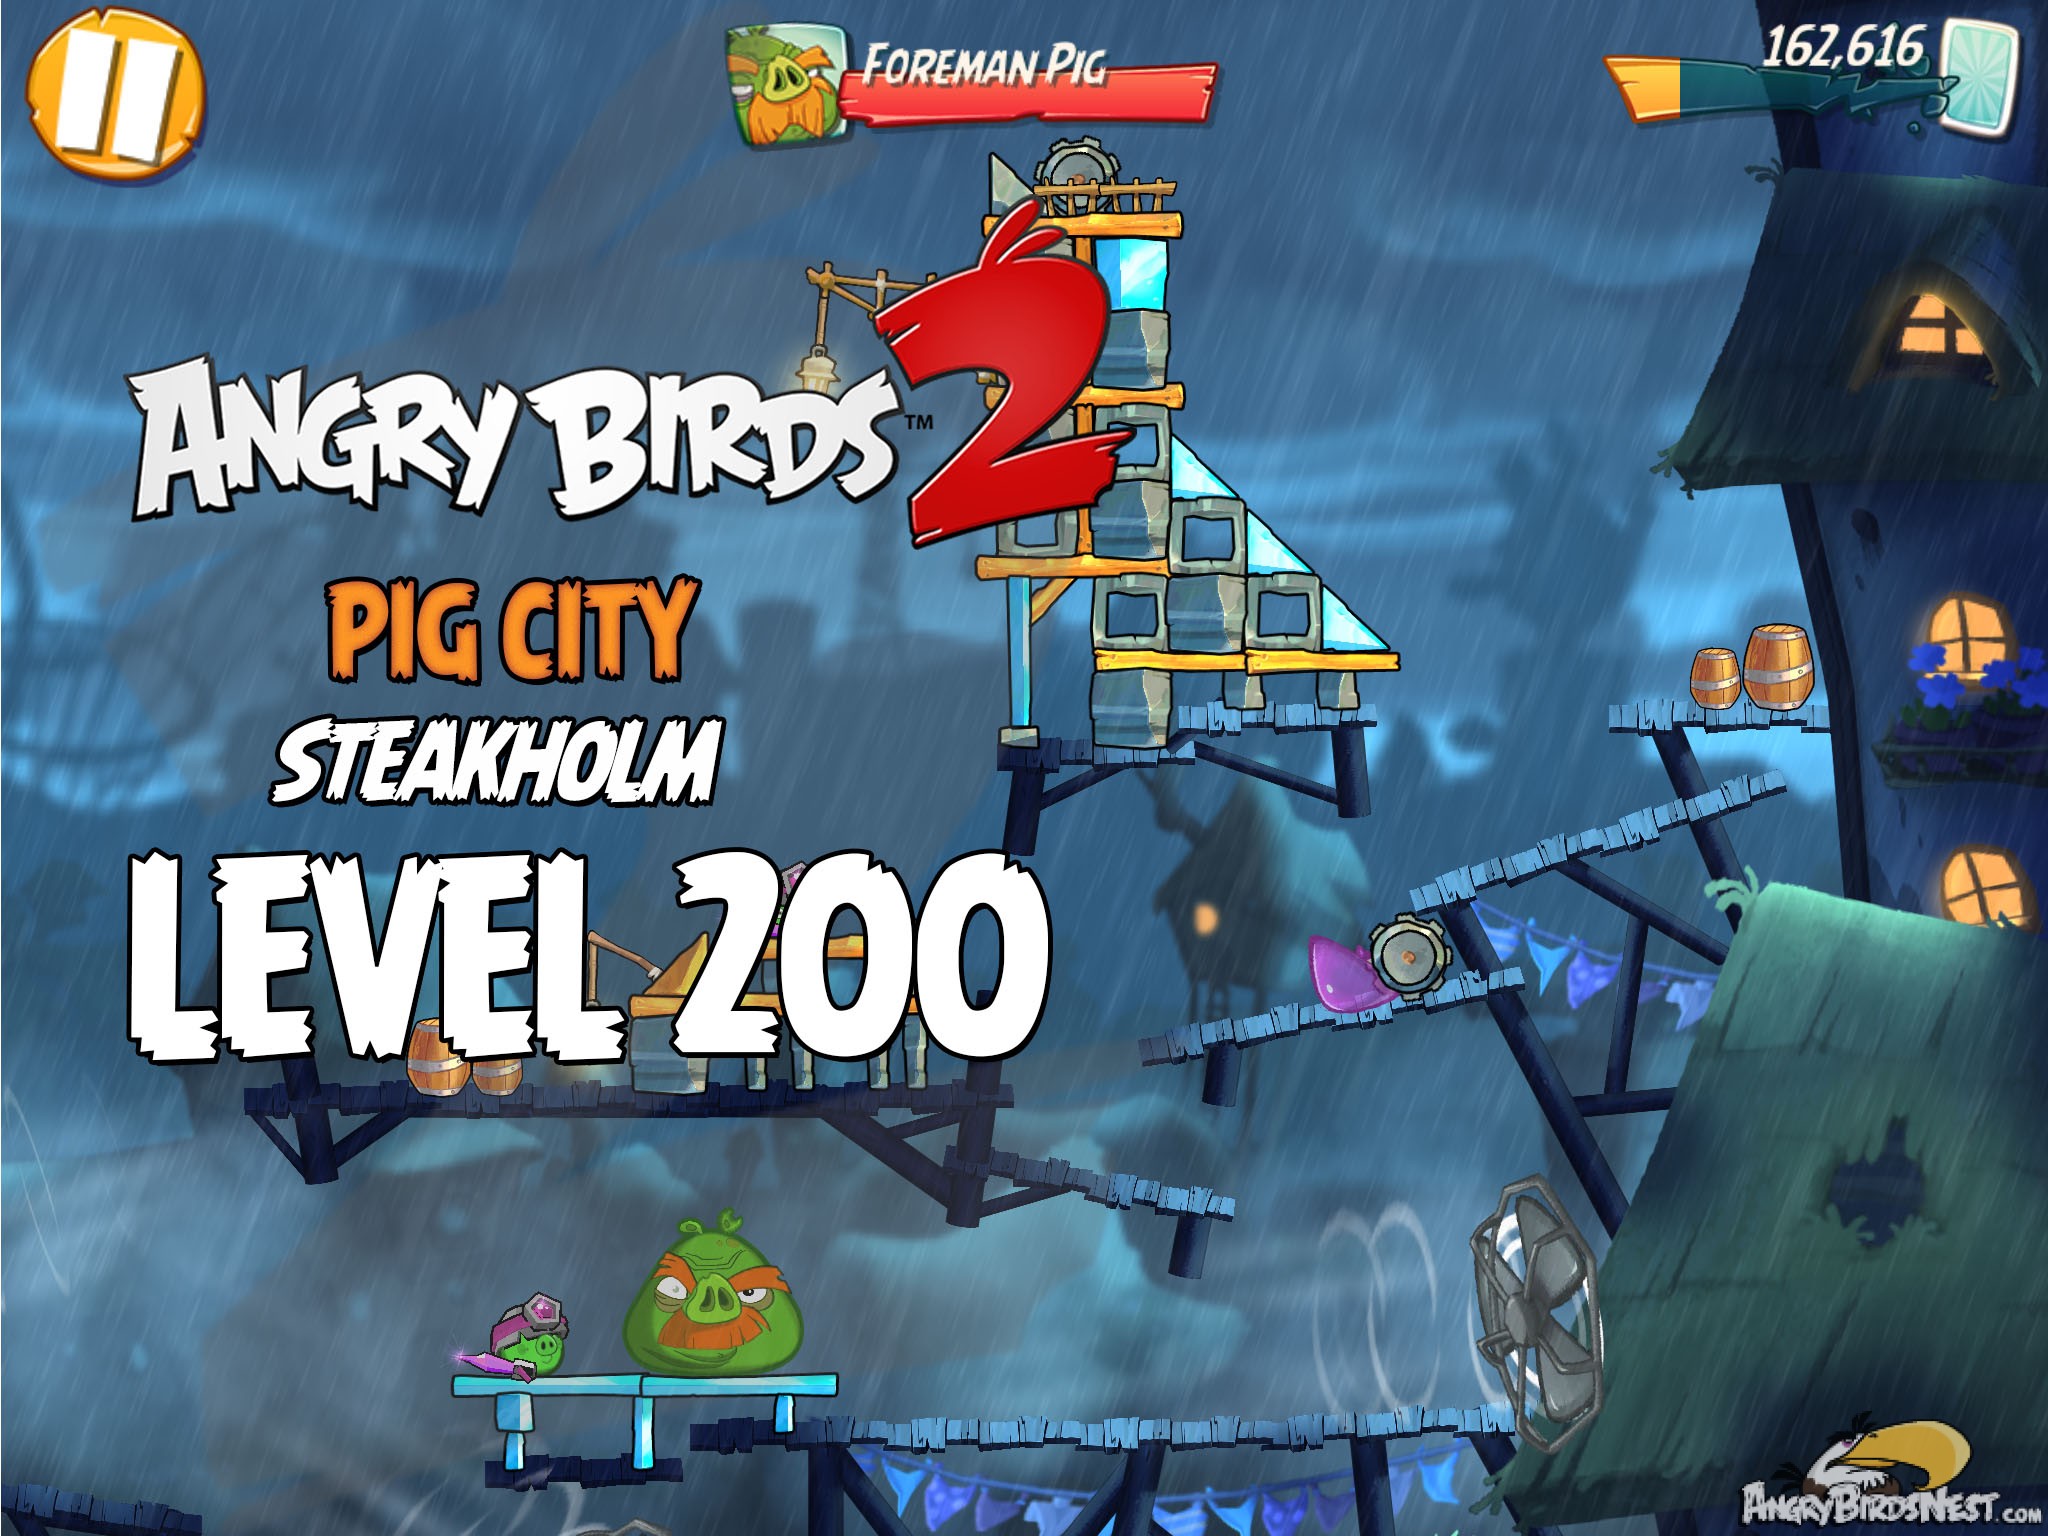 Angry Birds 2 Pig City Steakholm Level 200